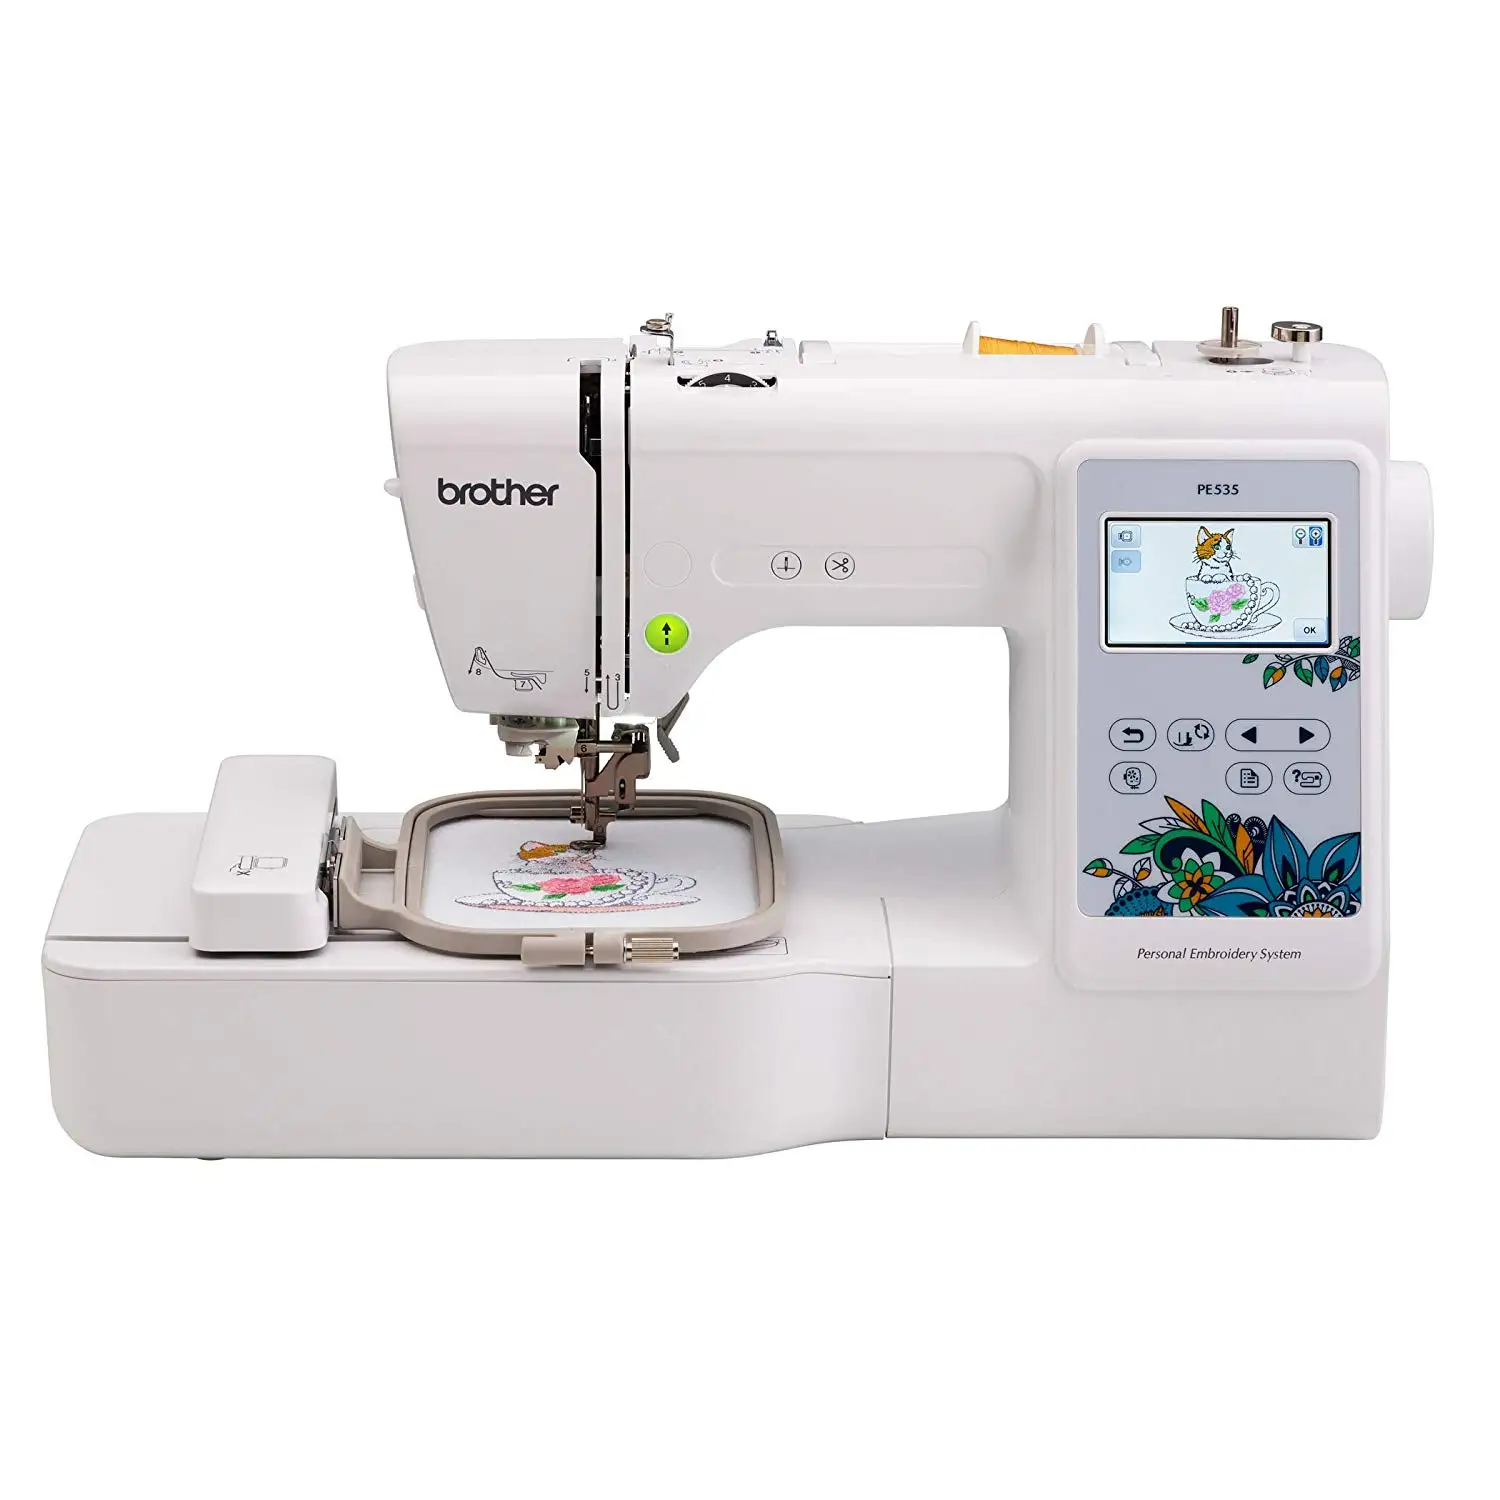 Cheap Brother Embroidery Machine Se425, find Brother Embroidery Machine ...